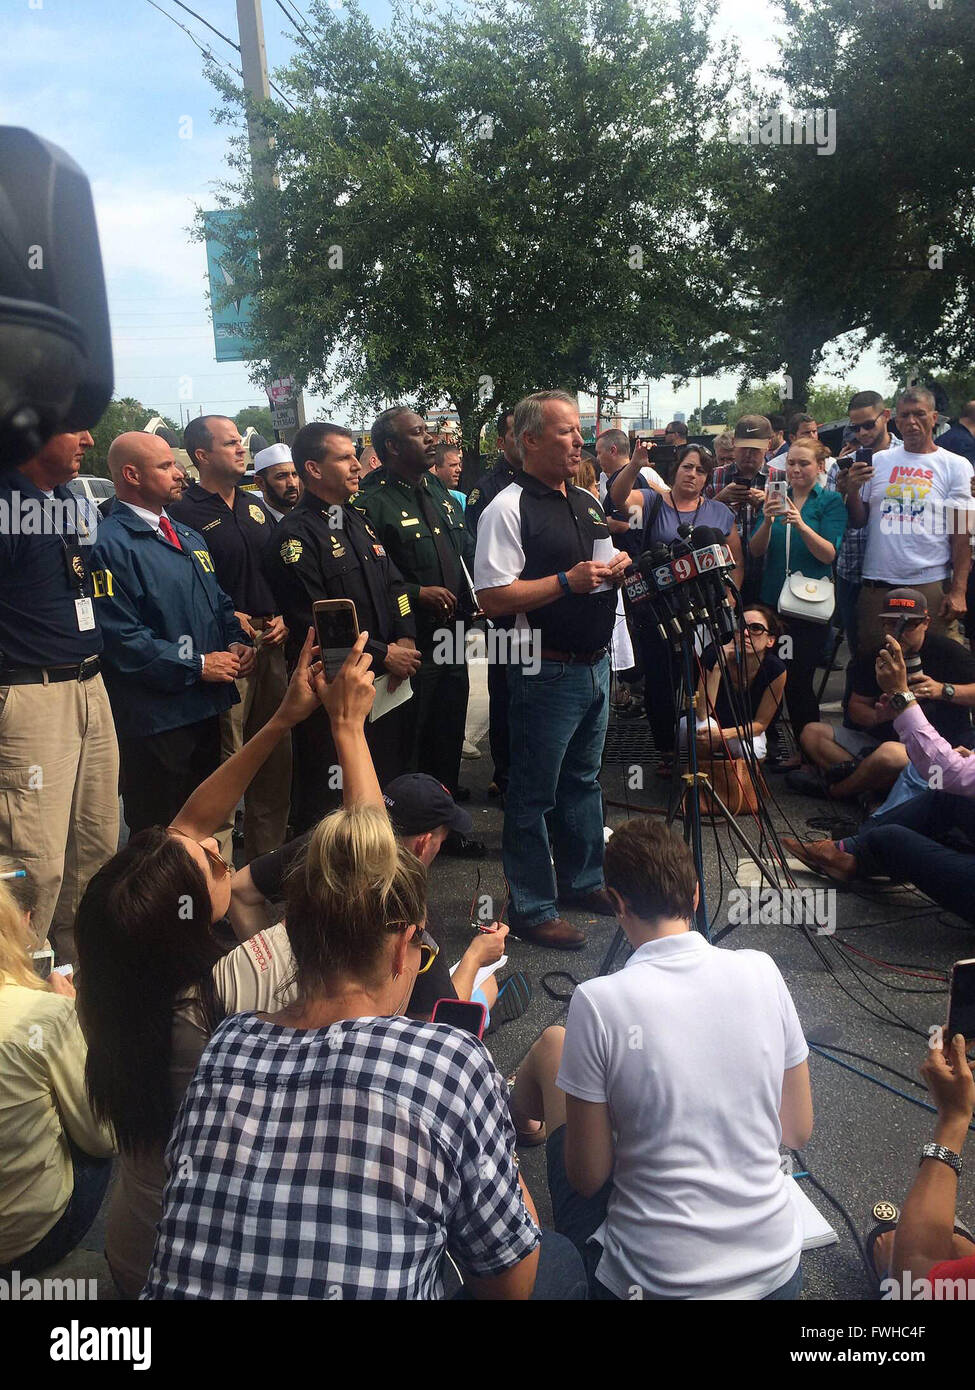 Orlando, USA. 12th June, 2016. Photo provided by Orlando Police Department shows Orlando Mayor Buddy Dyer (C) speaks to the media about the Pulse nightclub shooting in Orlando, Florida, the United States, June 12, 2016. About 50 people were killed and 53 others wounded early Sunday morning in a shooting incident at a gay nightclub in Orlando, Florida, according to Orlando mayor. © Orlando Police Department/Xinhua/Alamy Live News Stock Photo